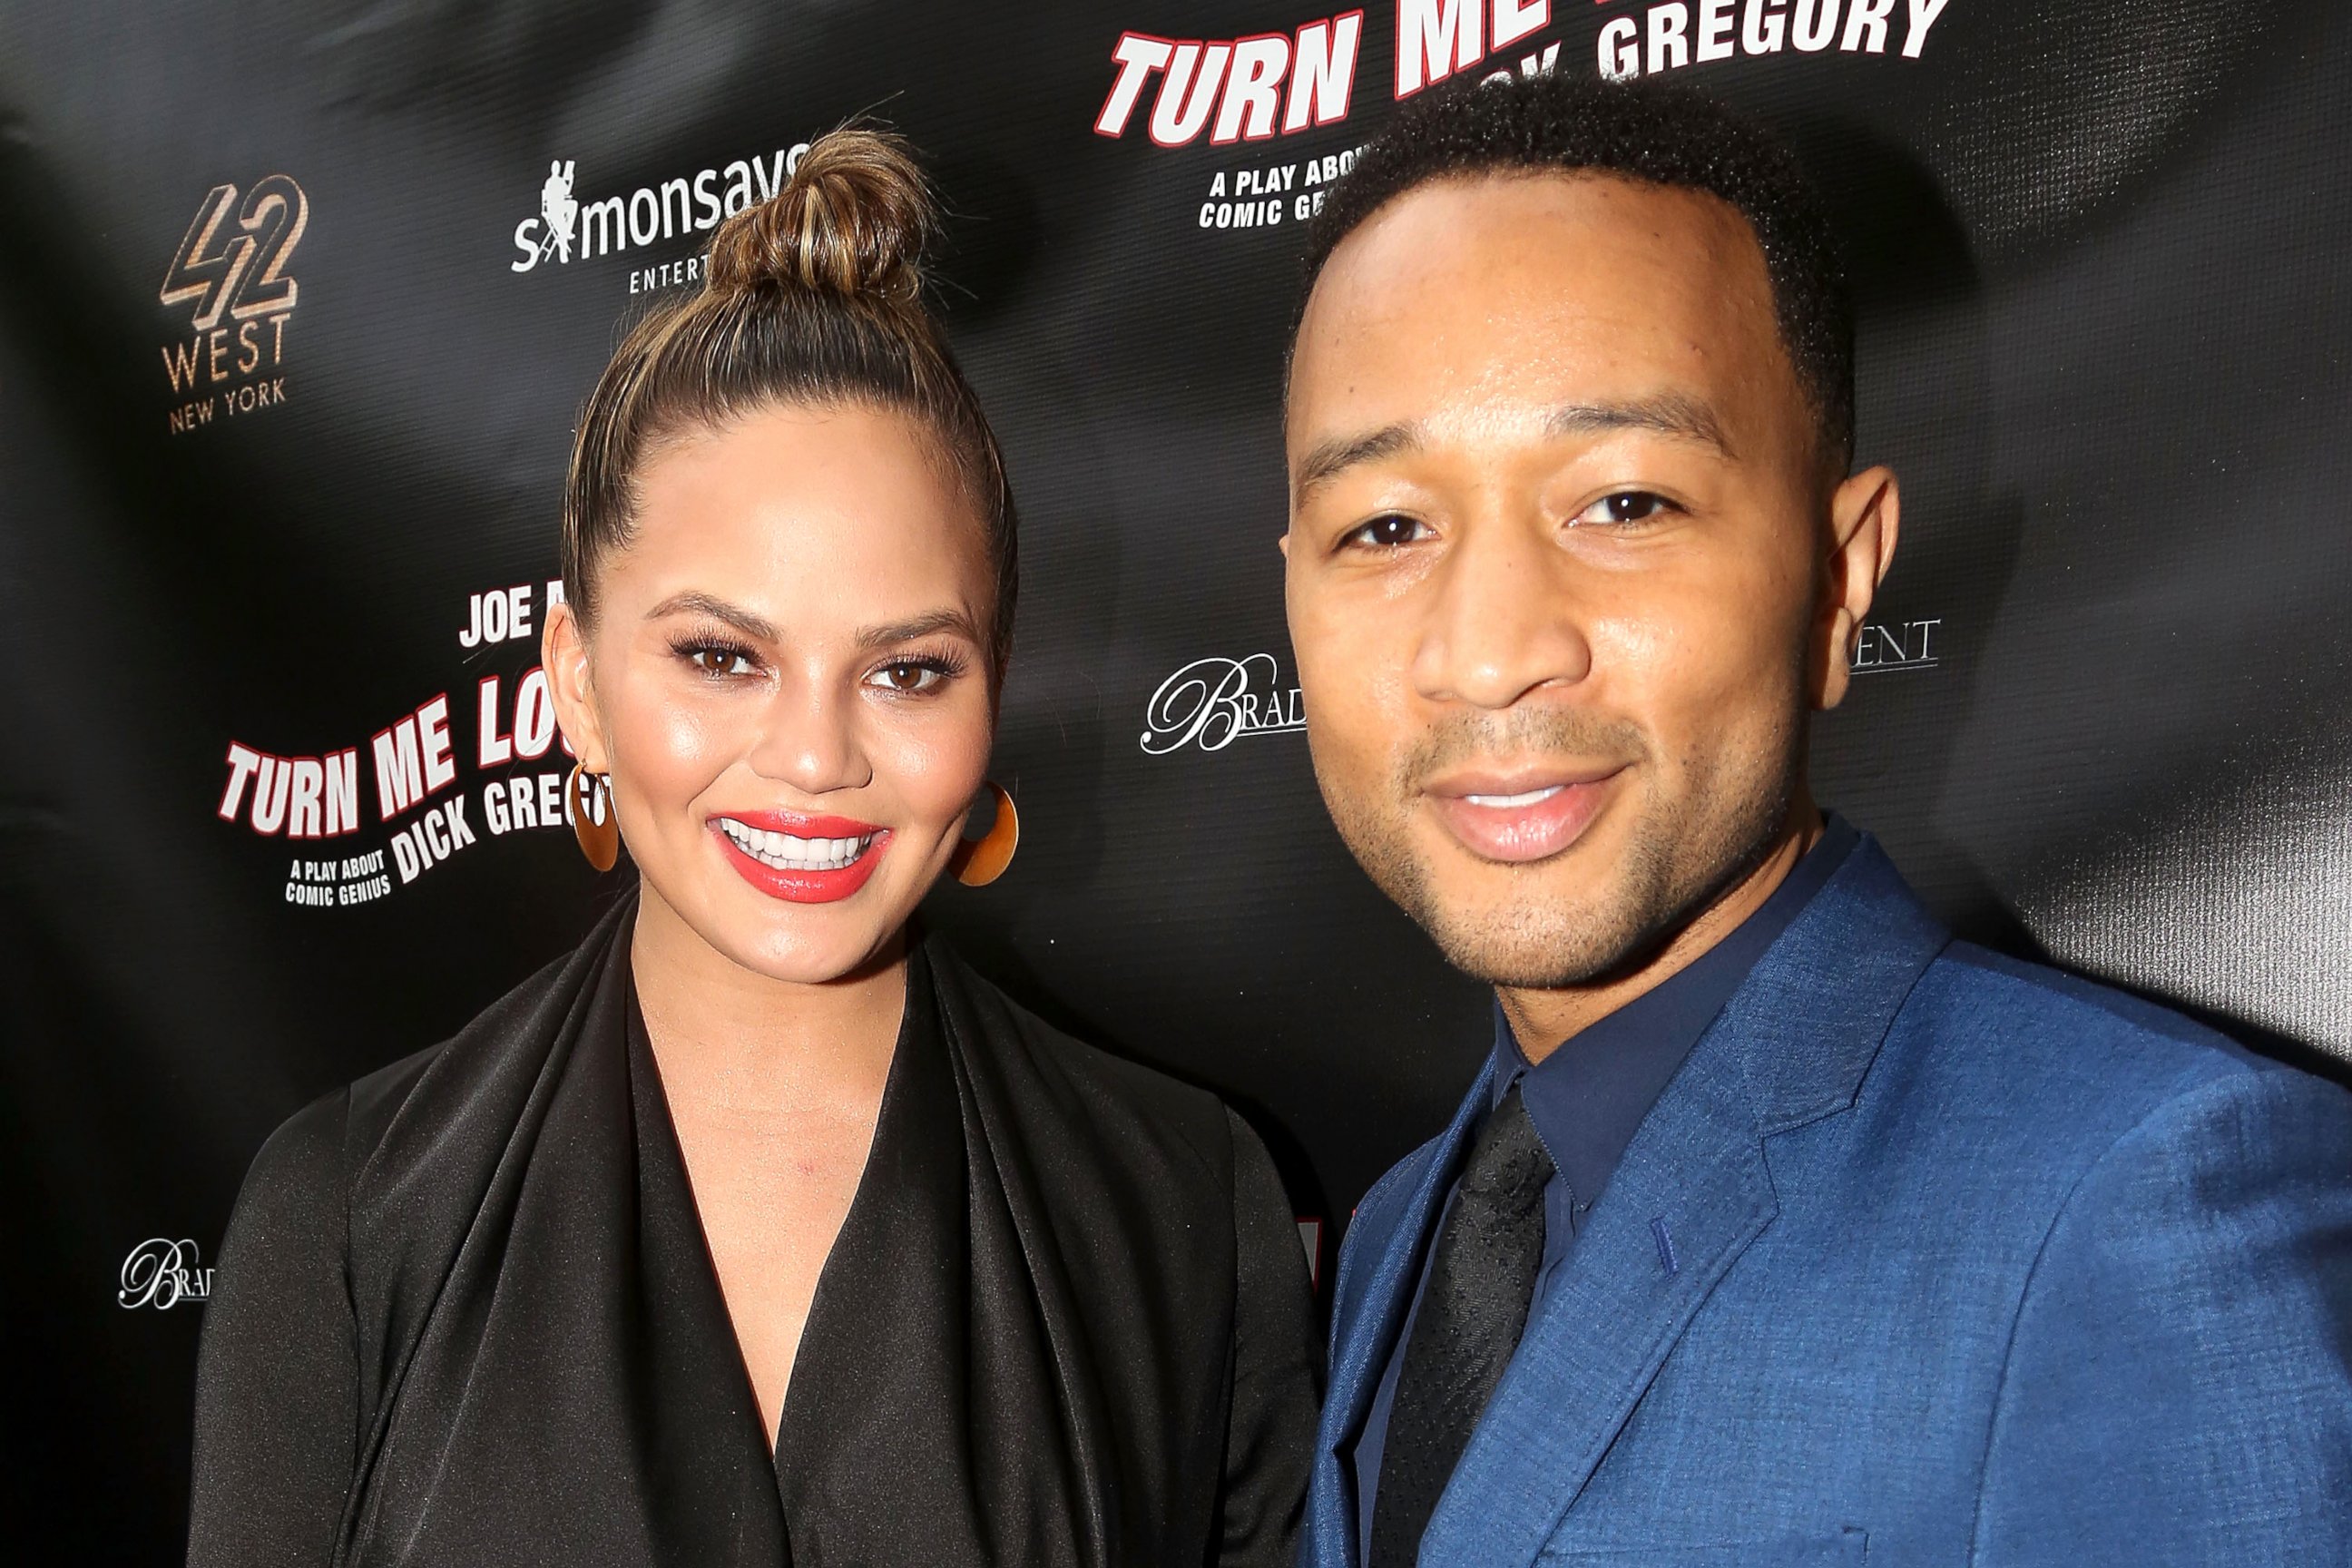 PHOTO: Chrissy Teigen and John Legend pose at The Opening Night of "Turn Me Loose" at The Westside Theatre, May 19, 2016, in New York City.